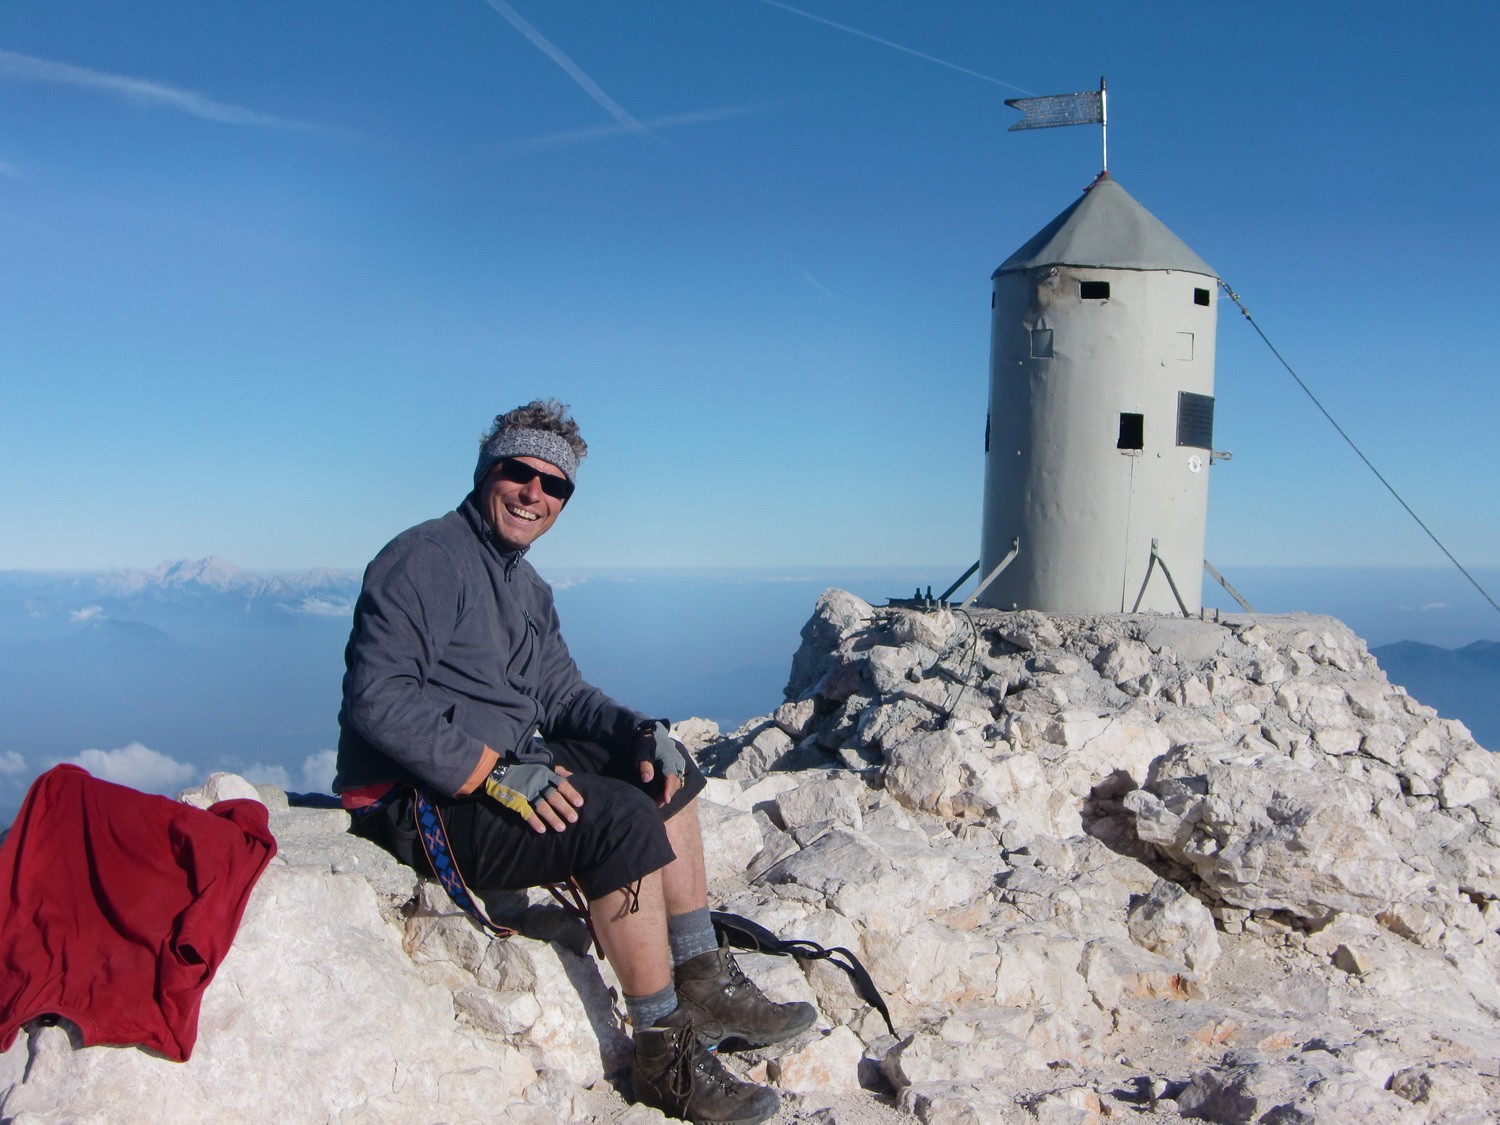 On top of Triglav, the highest mountain in Slovenia (2856 meters)